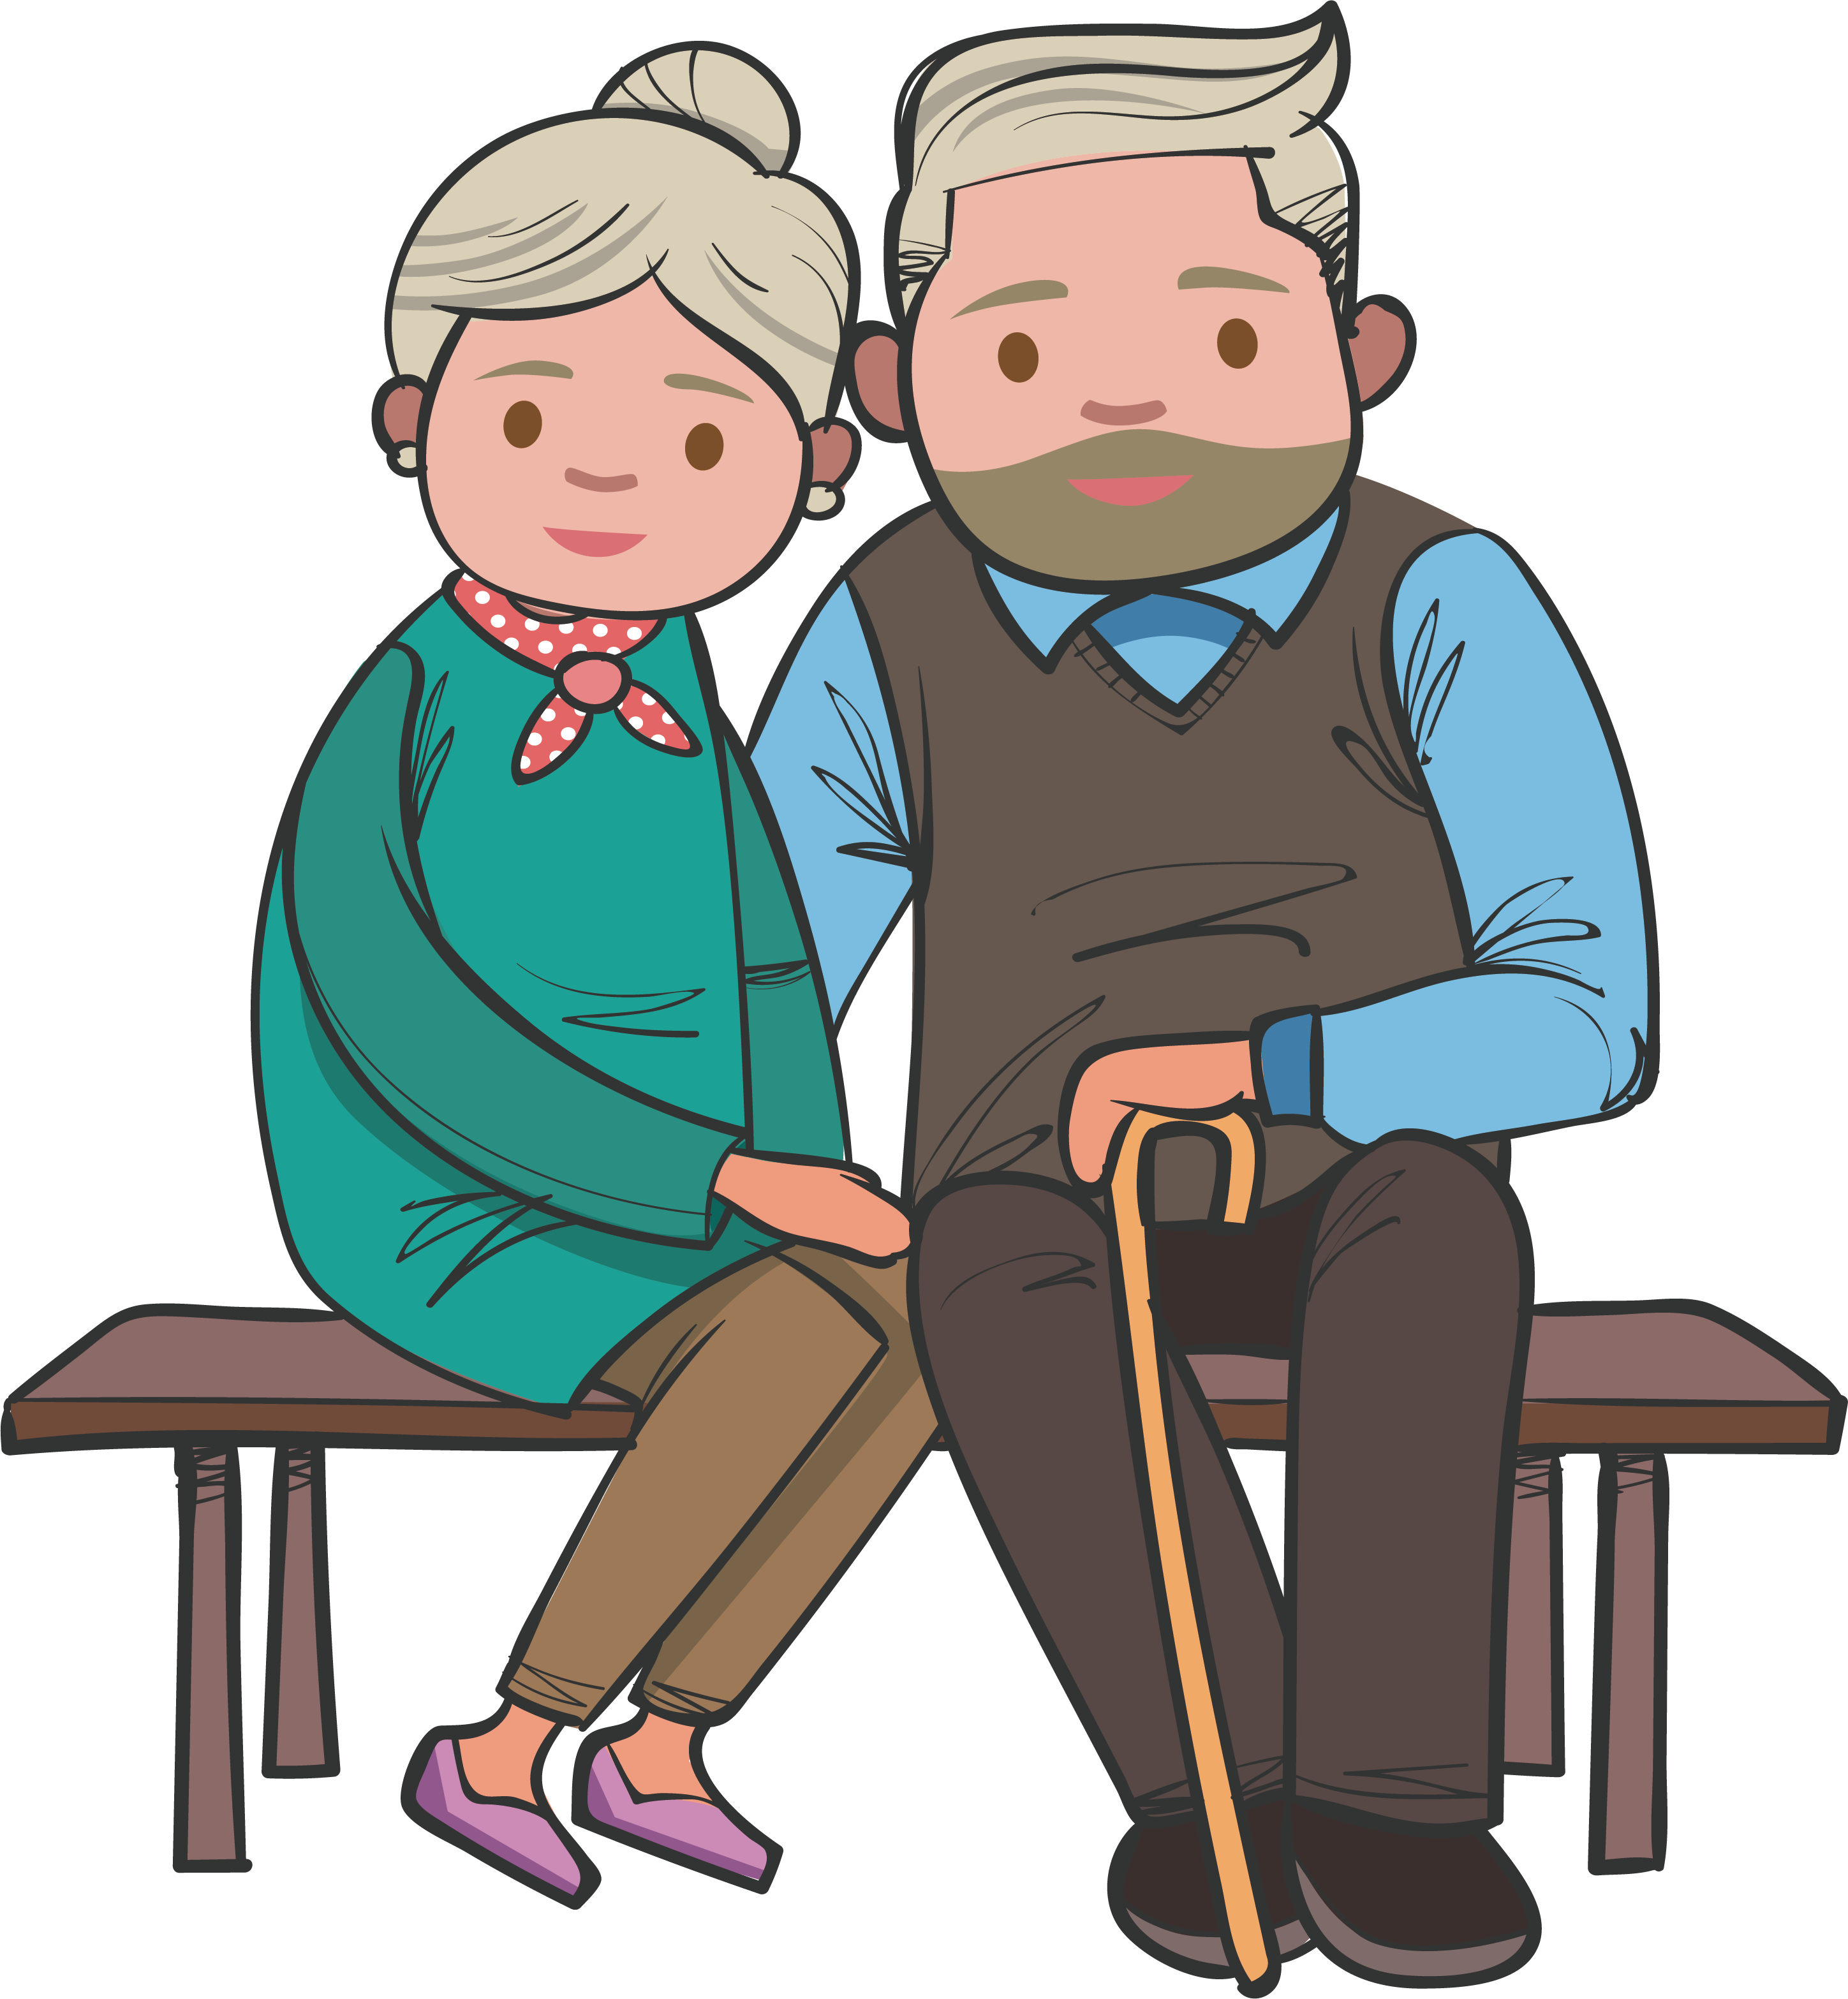 Bench age grandparent the. Grandparents clipart man old indian